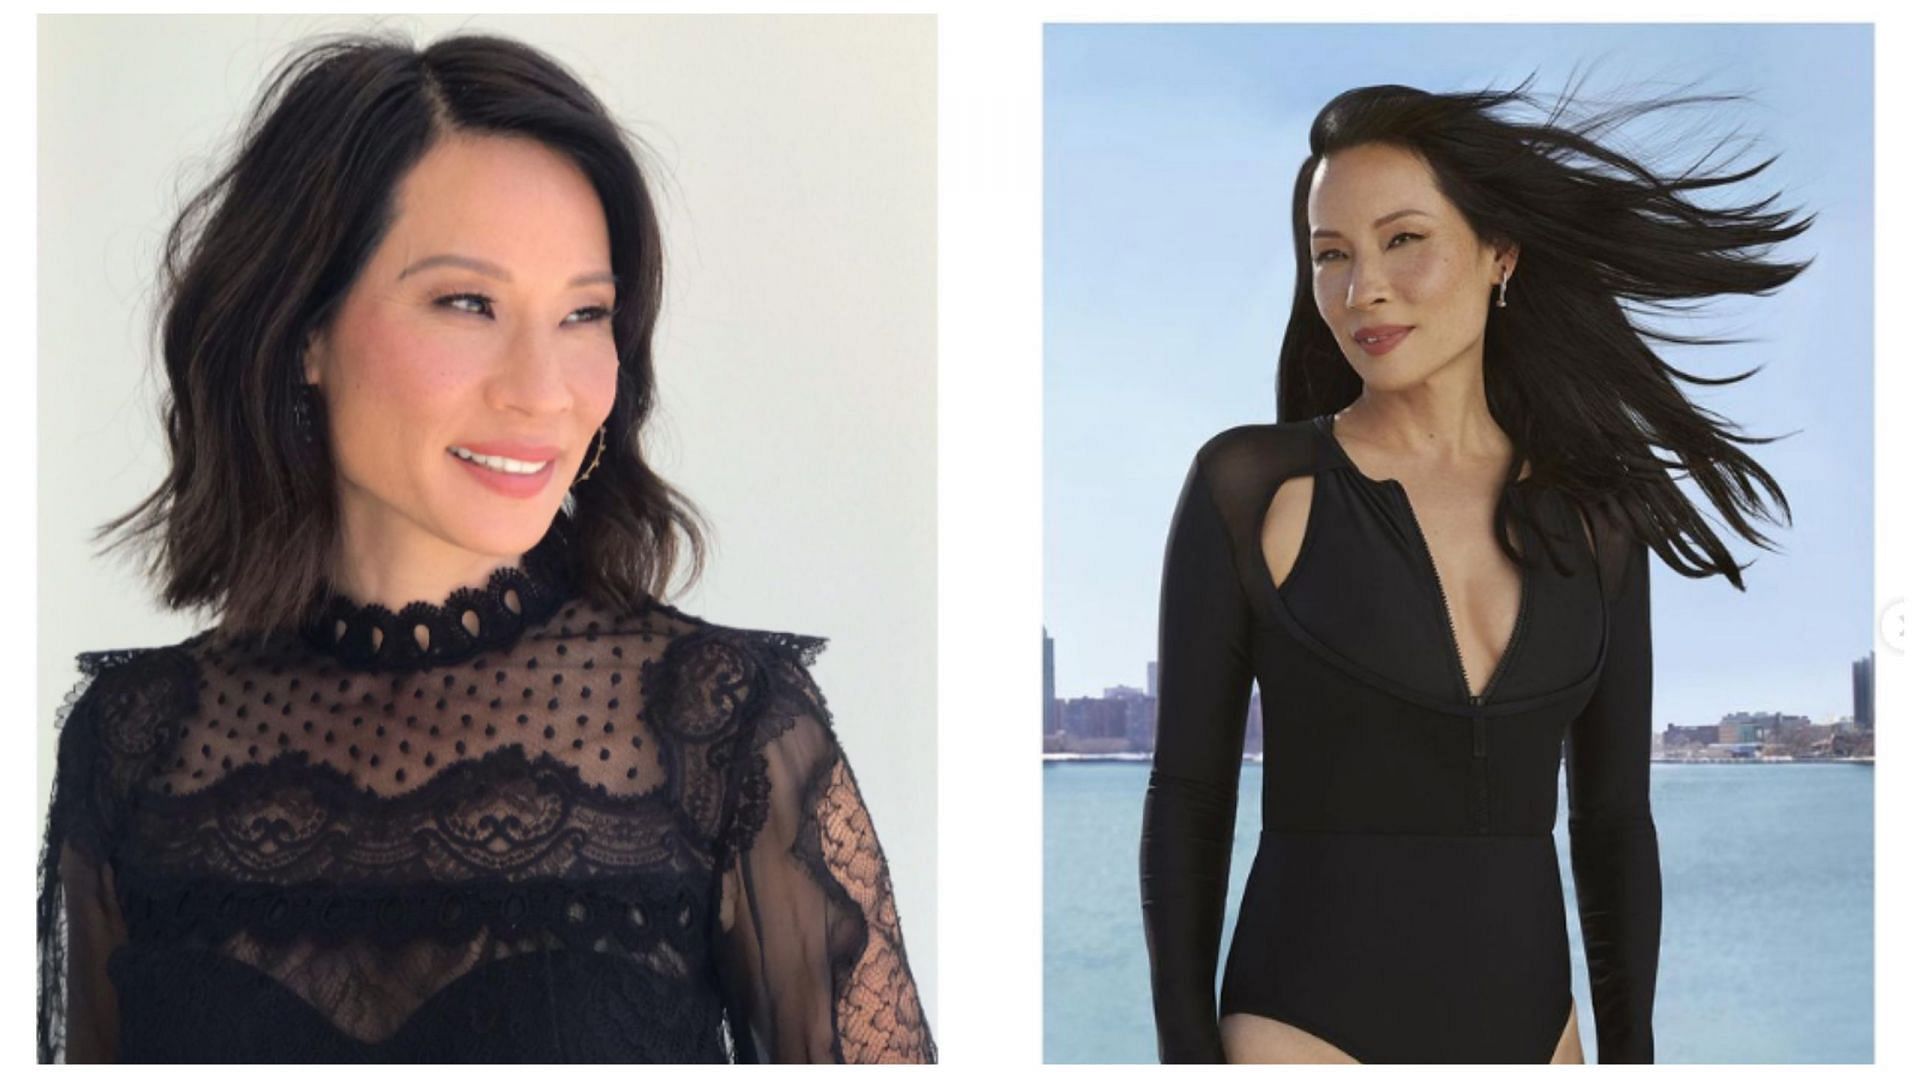 According to Lucy Liu eating well is the key to healthy life. (Image via @lucyliu)